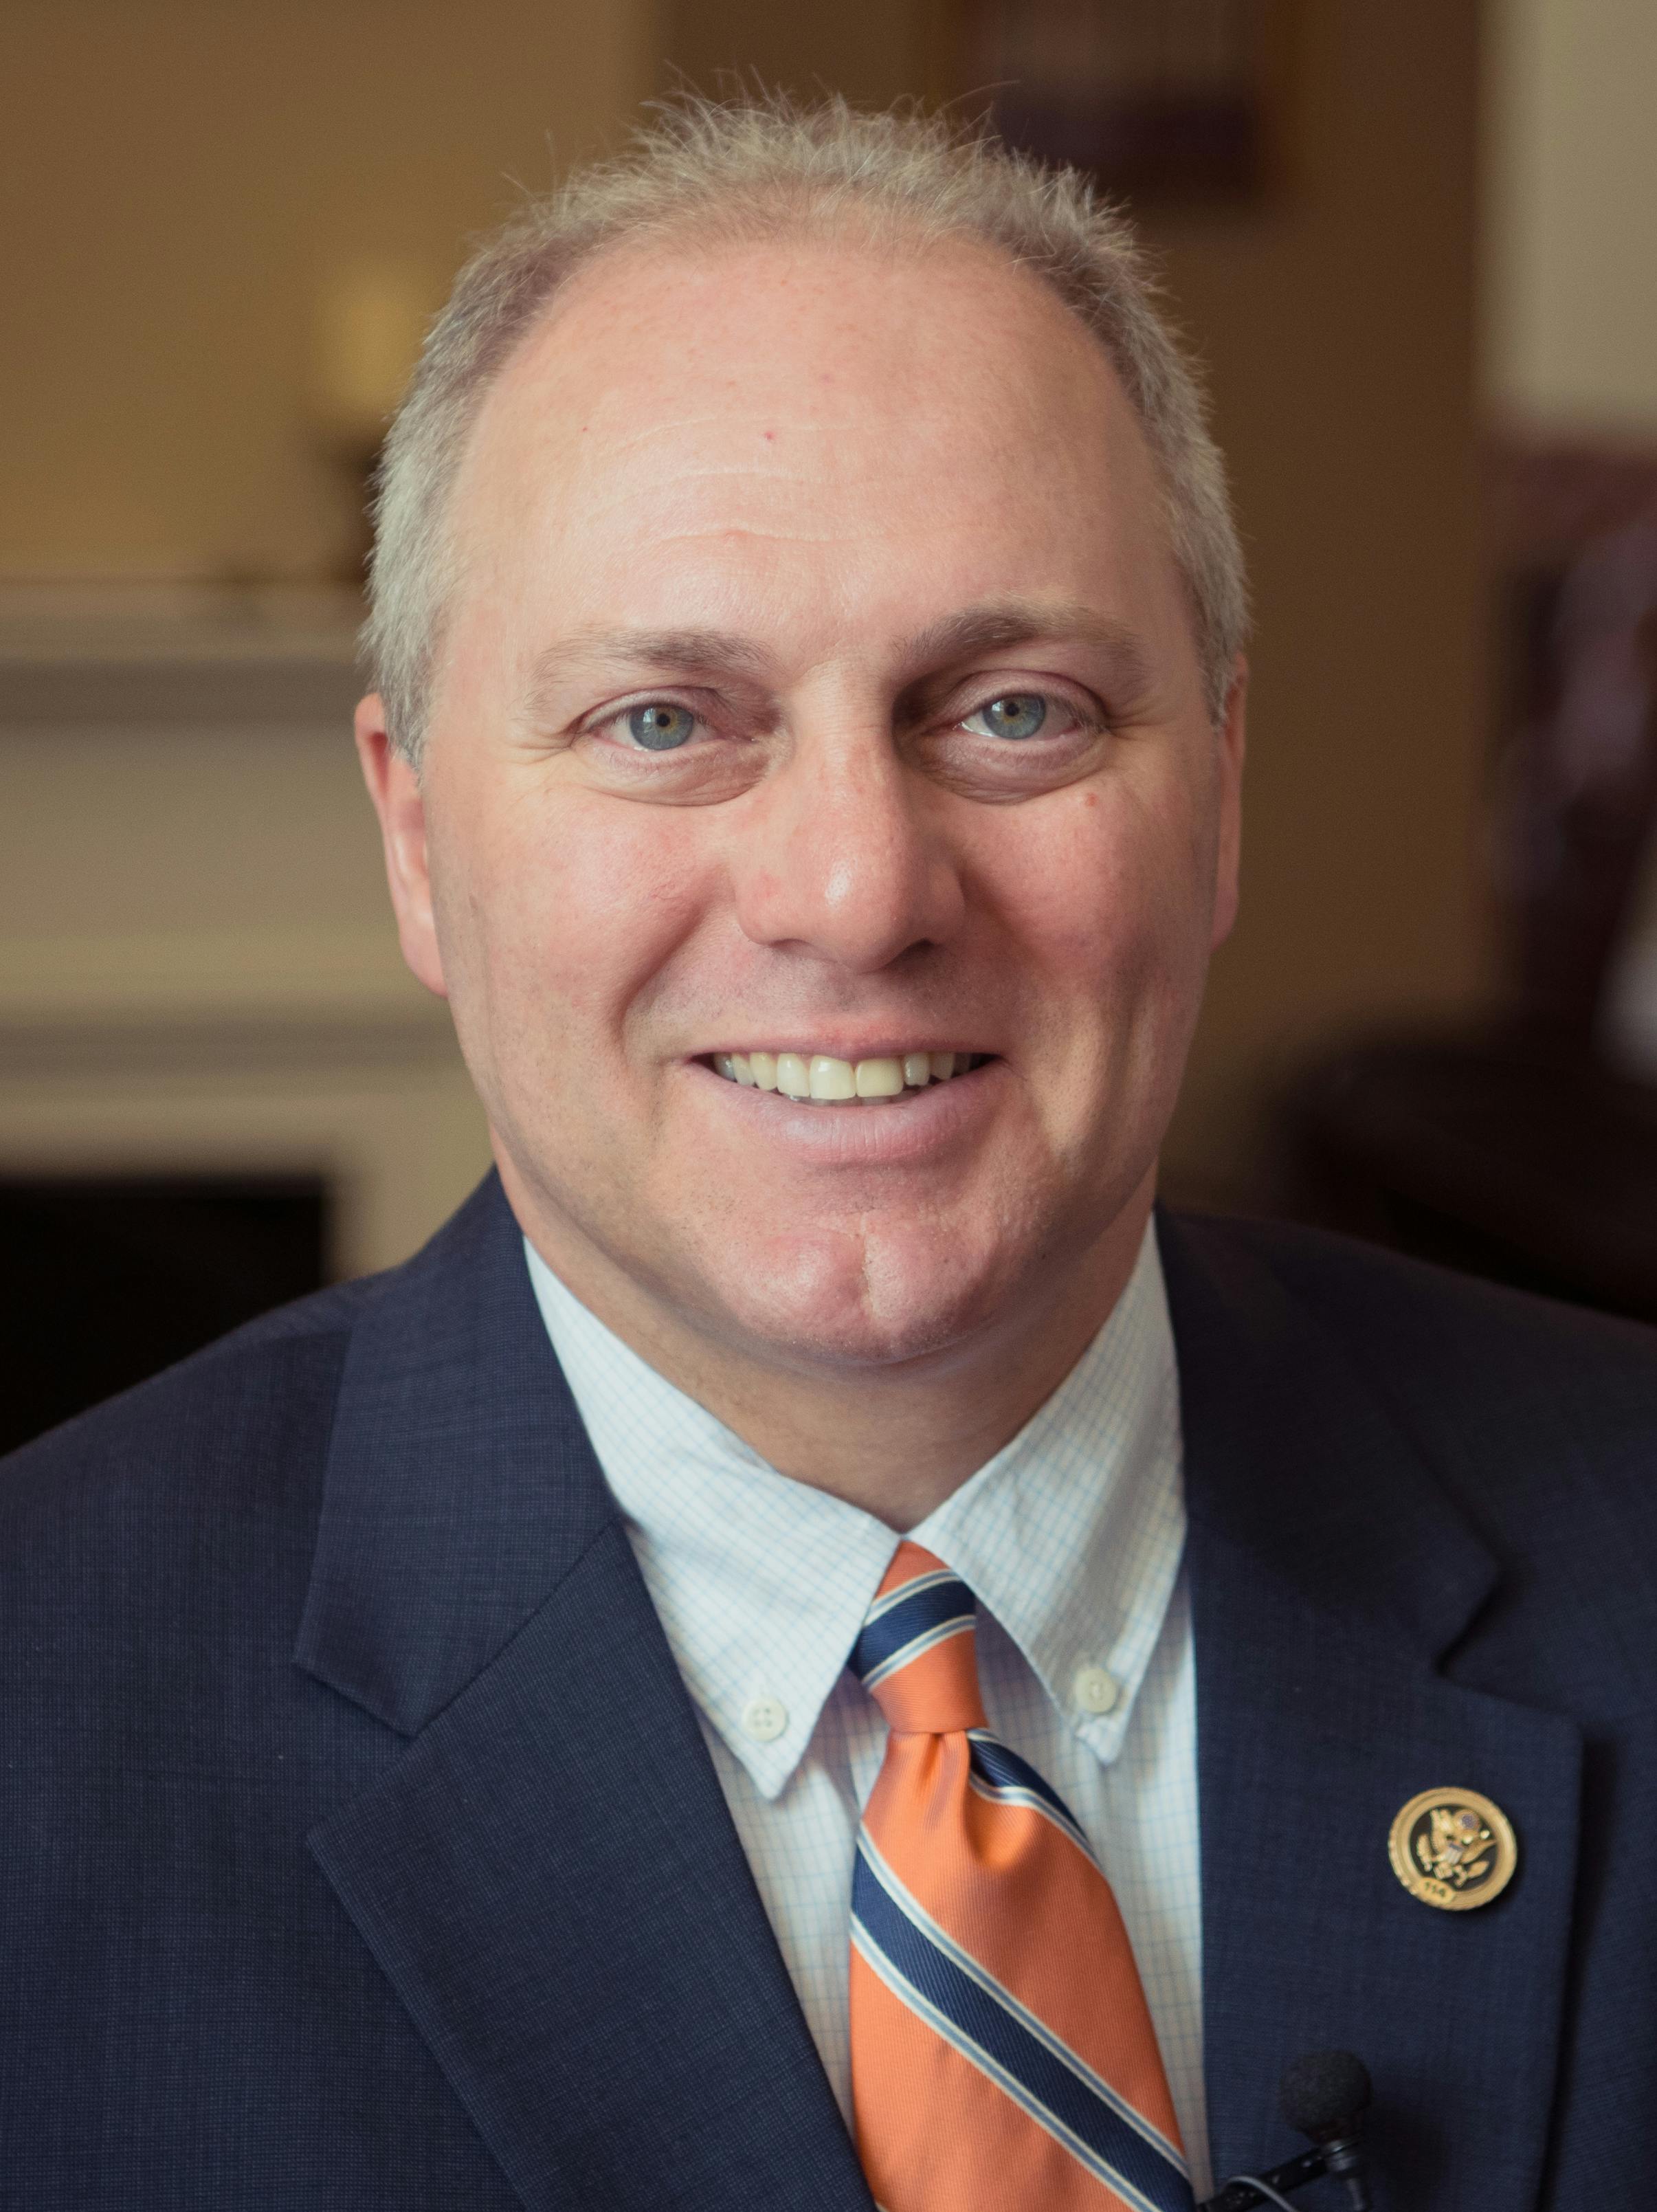 Profile picture of Steve Scalise